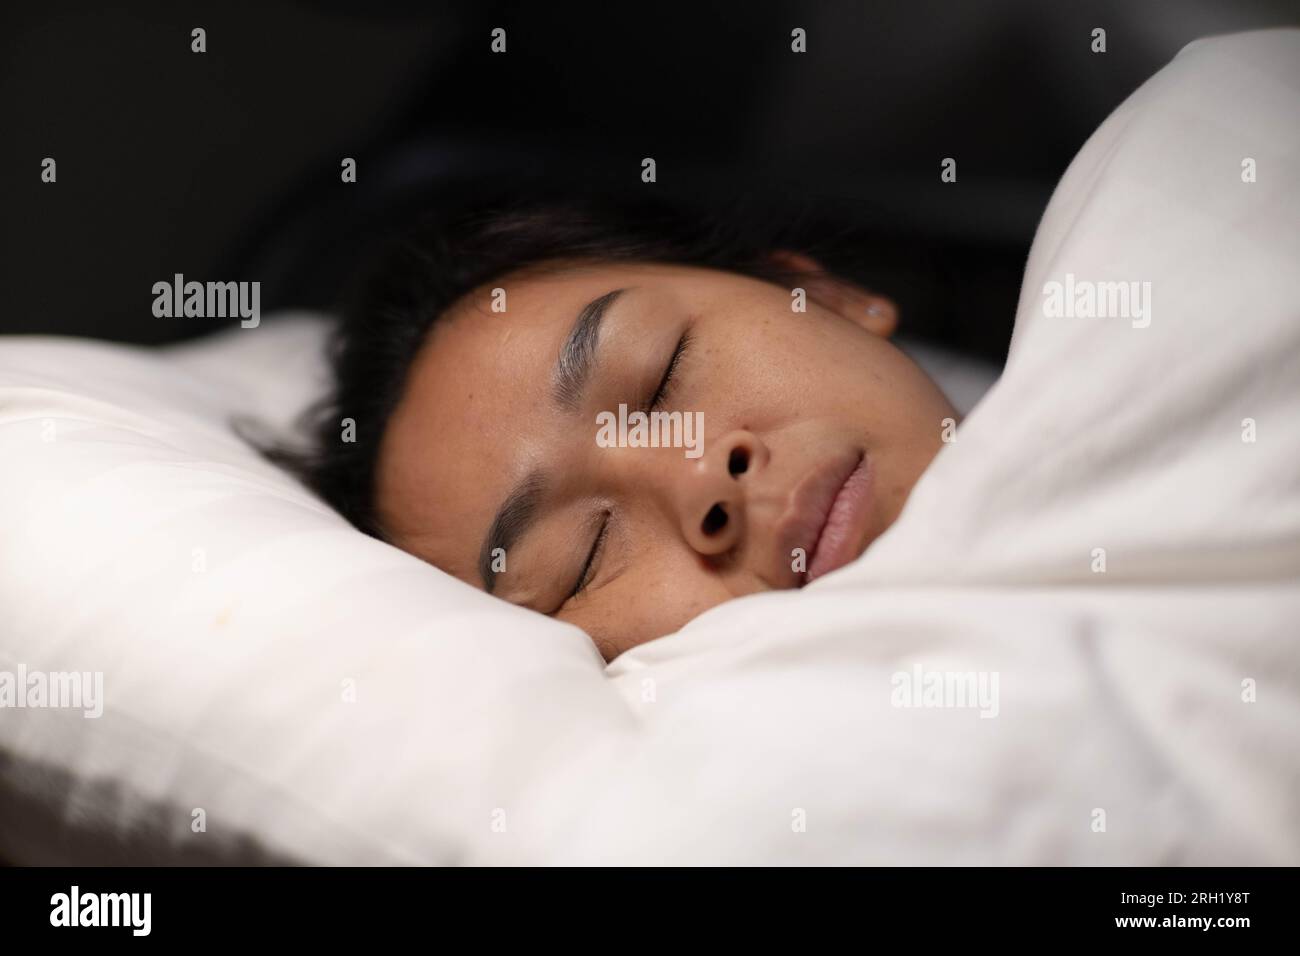 Asian woman resting covered with blanket on white sheets in bedroom. Woman sleeping. Peaceful woman lying in bed and keeping eyes closed while covered Stock Photo